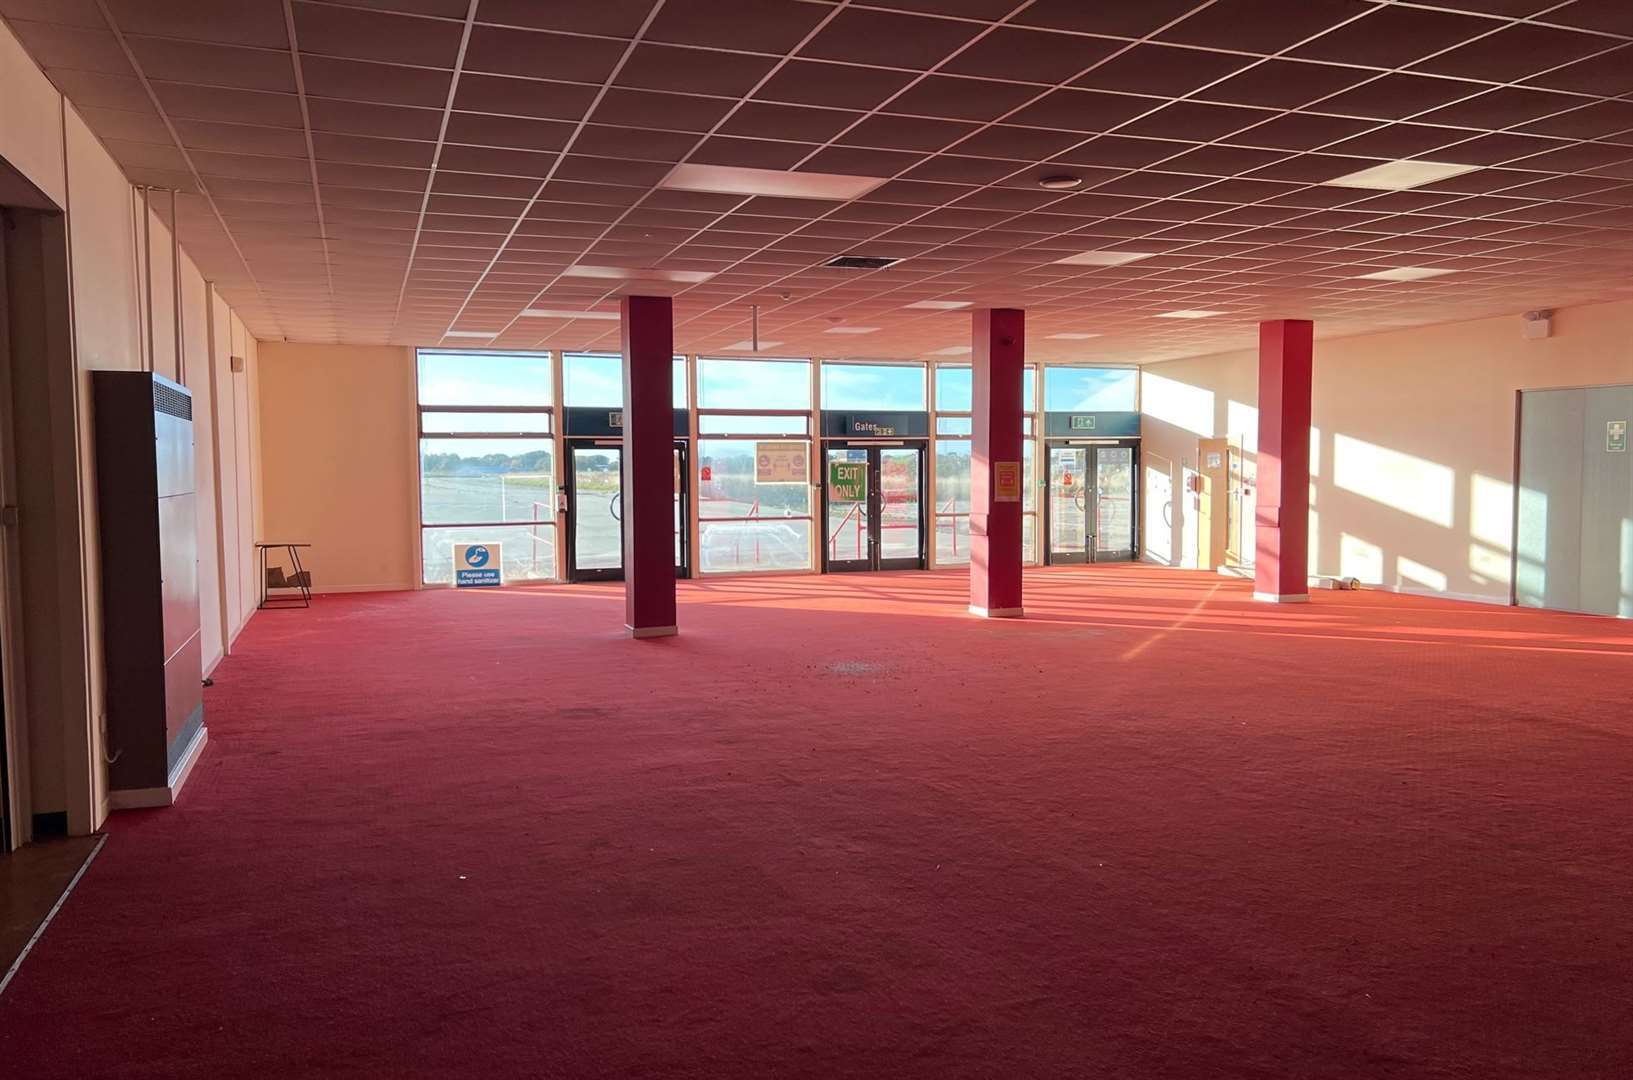 How the departure lounge at Manston Airport looks now – nearly 10 years after it shut